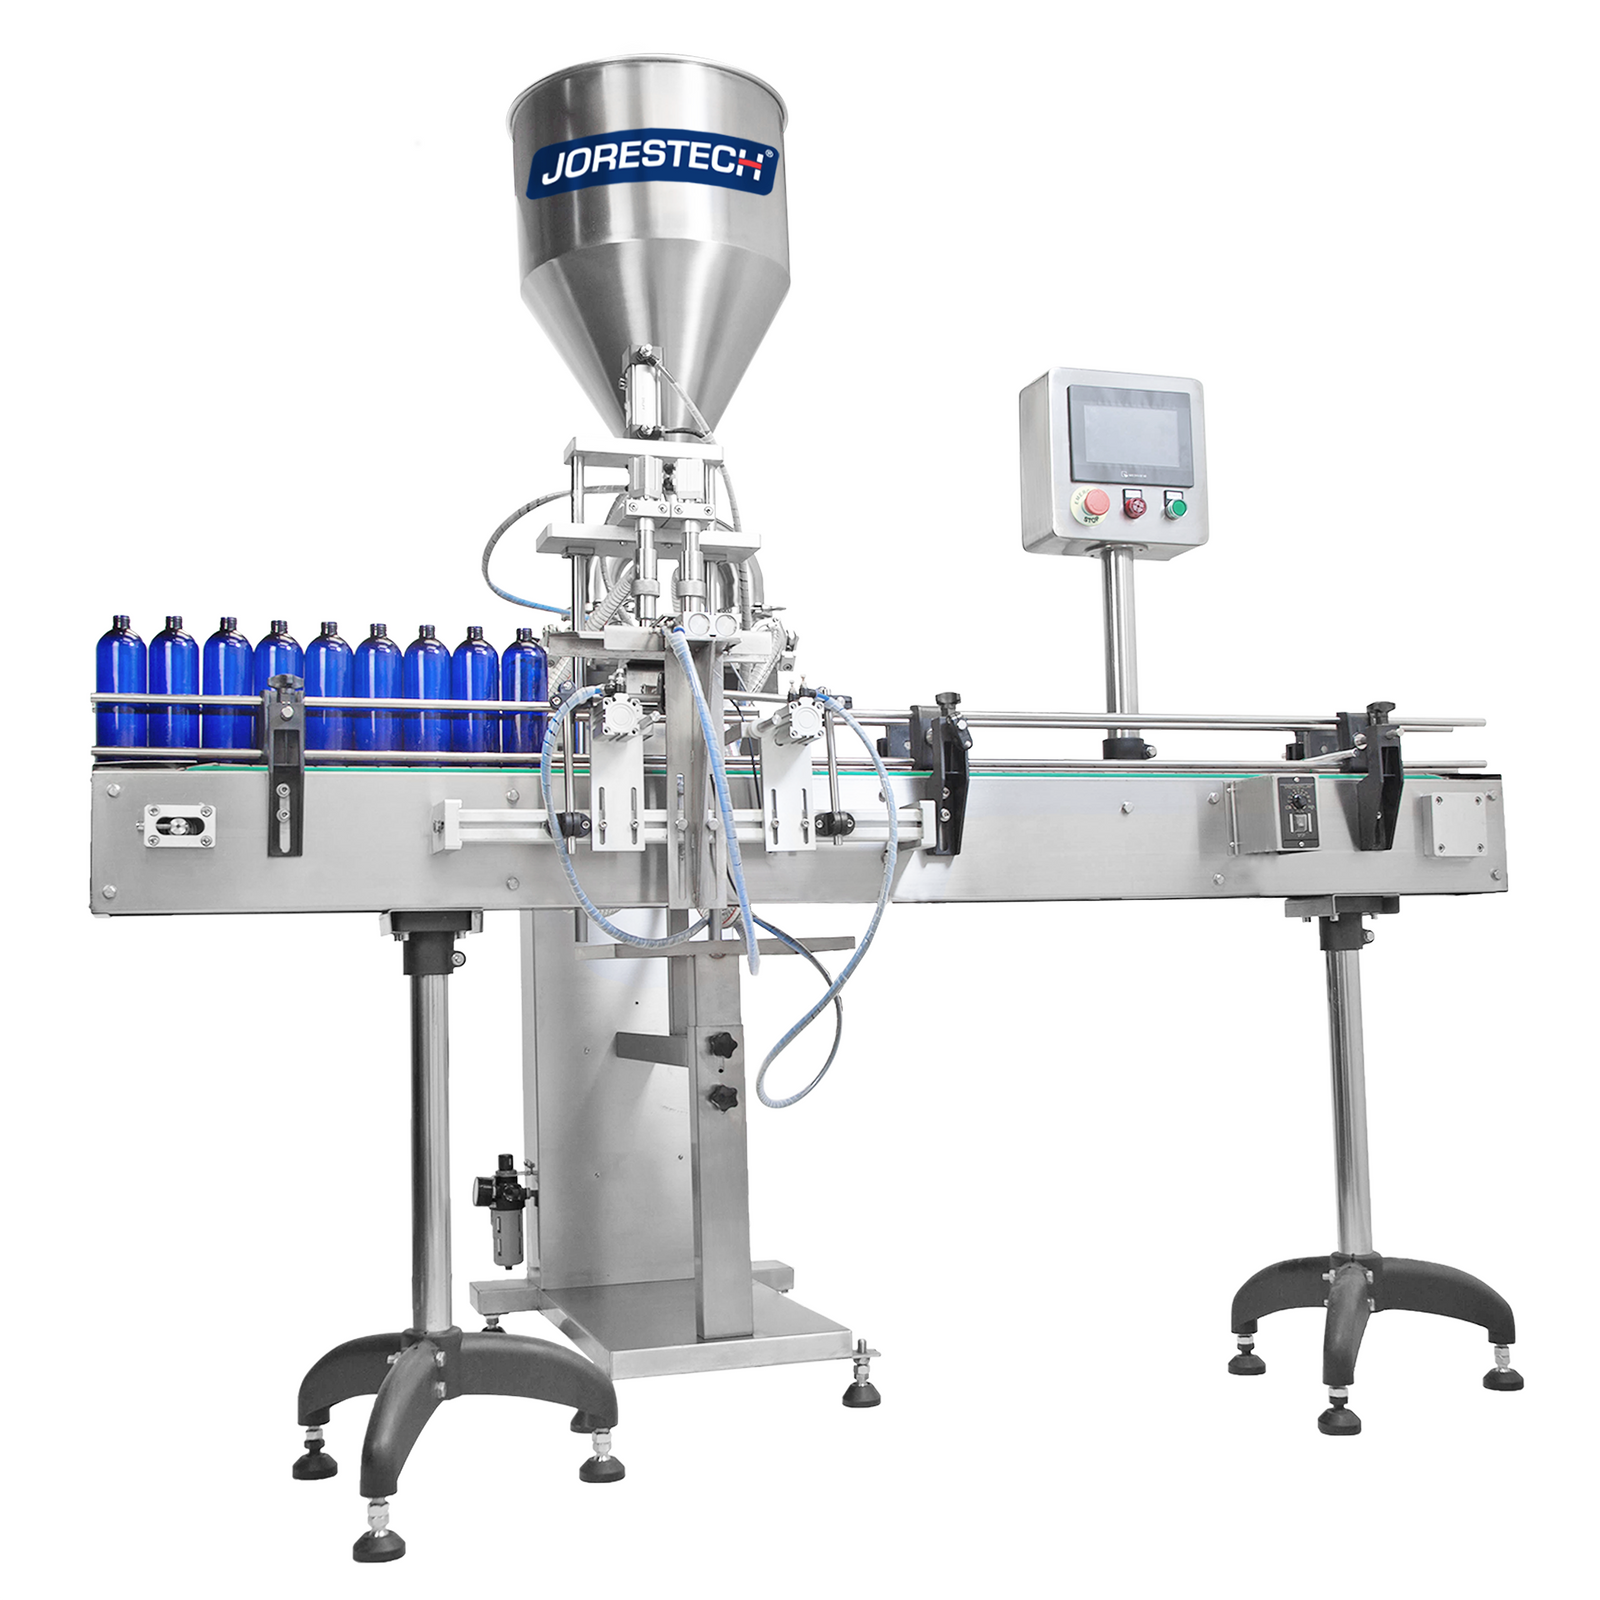 316 and 304 Stainless steel automatic dual head high viscosity paste piston filler in combination with a motorized conveyor by JORES TECHNOLOGIES®.Blue bottles are positioned on top of the conveyor and are being filled with a liquid.